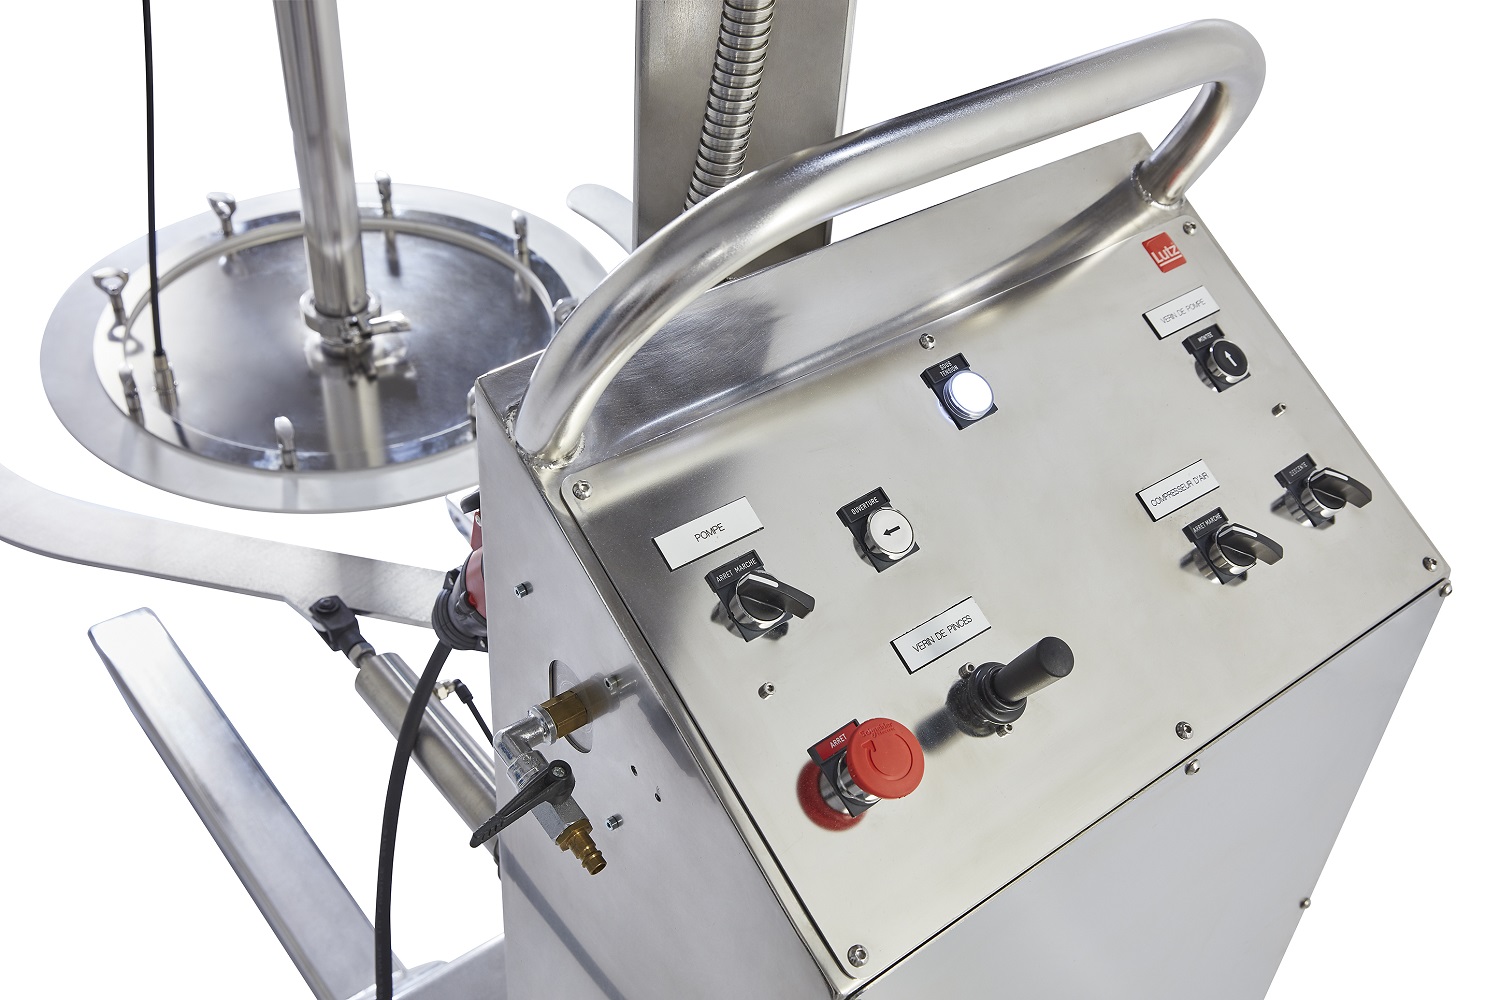 The follower plate system can be used to pump highly viscous substances.